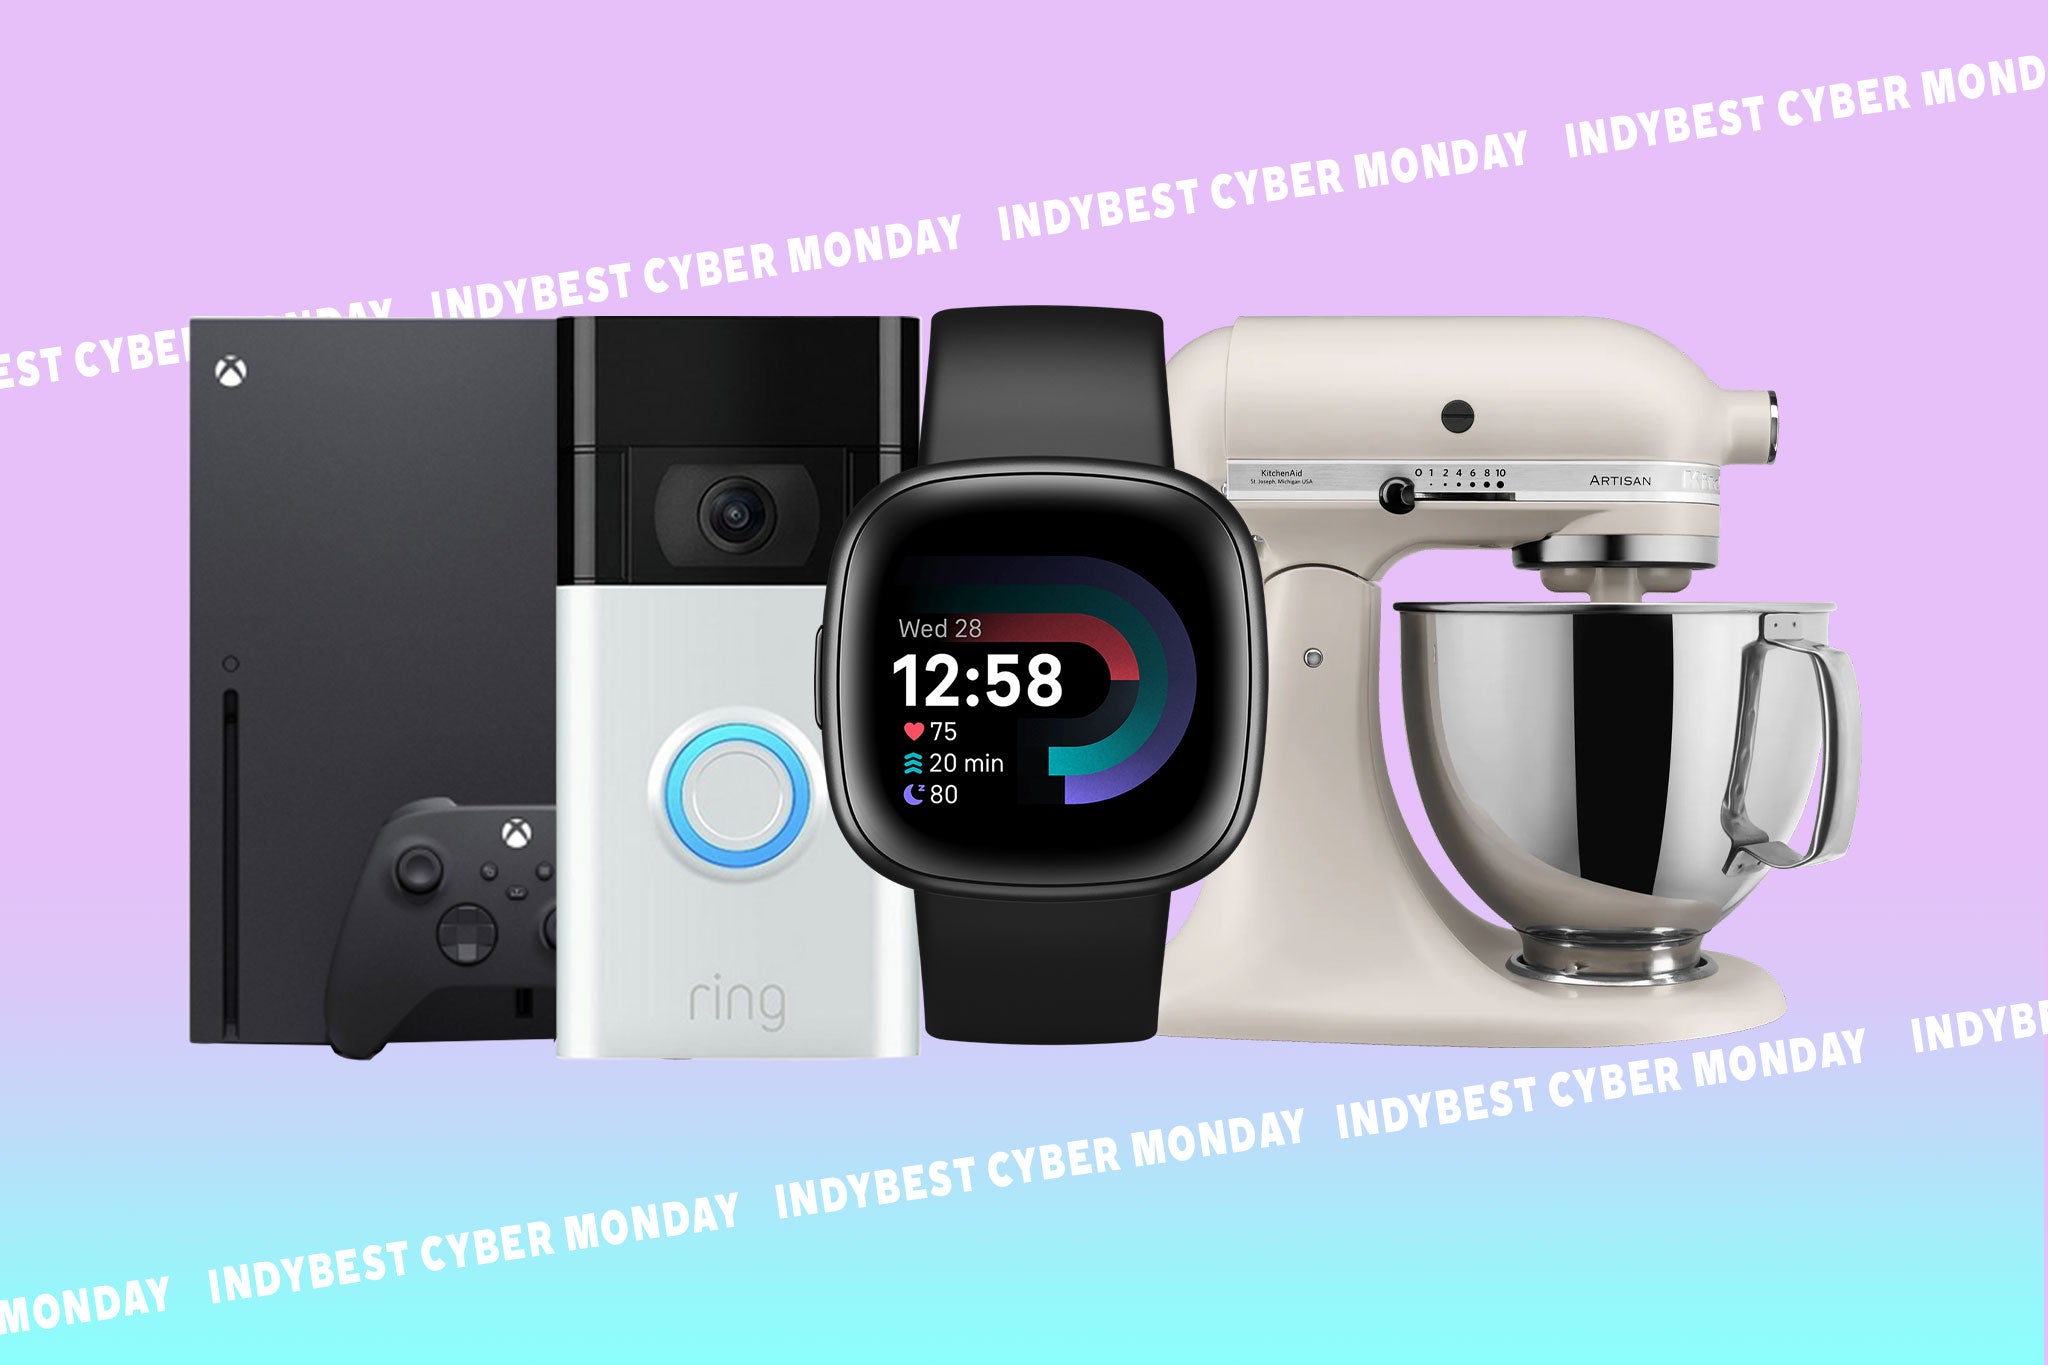 Get ready for Christmas with these crazy deals on Apple tech 